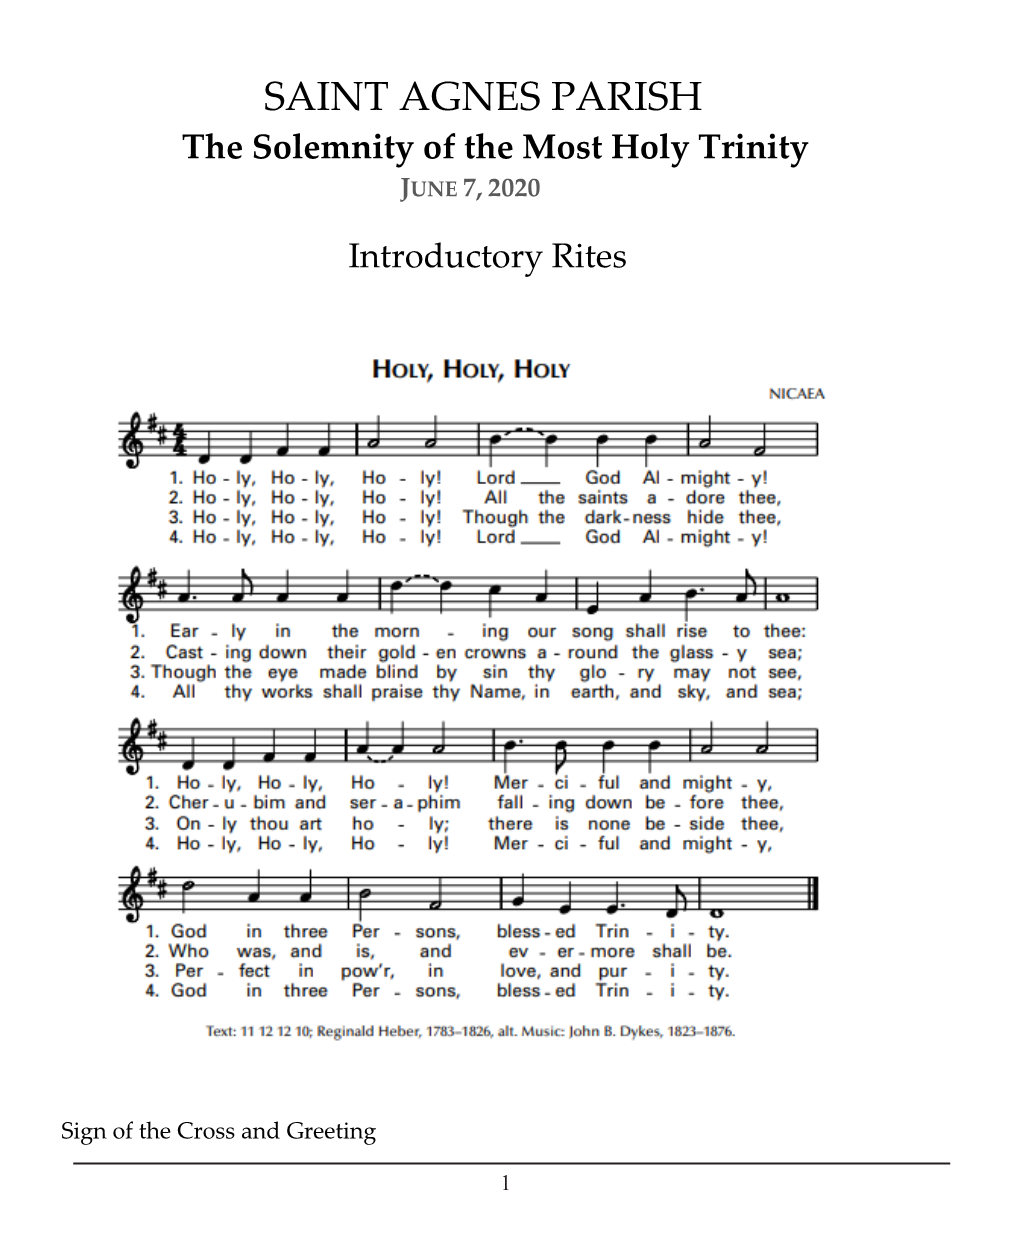 SAINT AGNES PARISH the Solemnity of the Most Holy Trinity JUNE 7, 2020